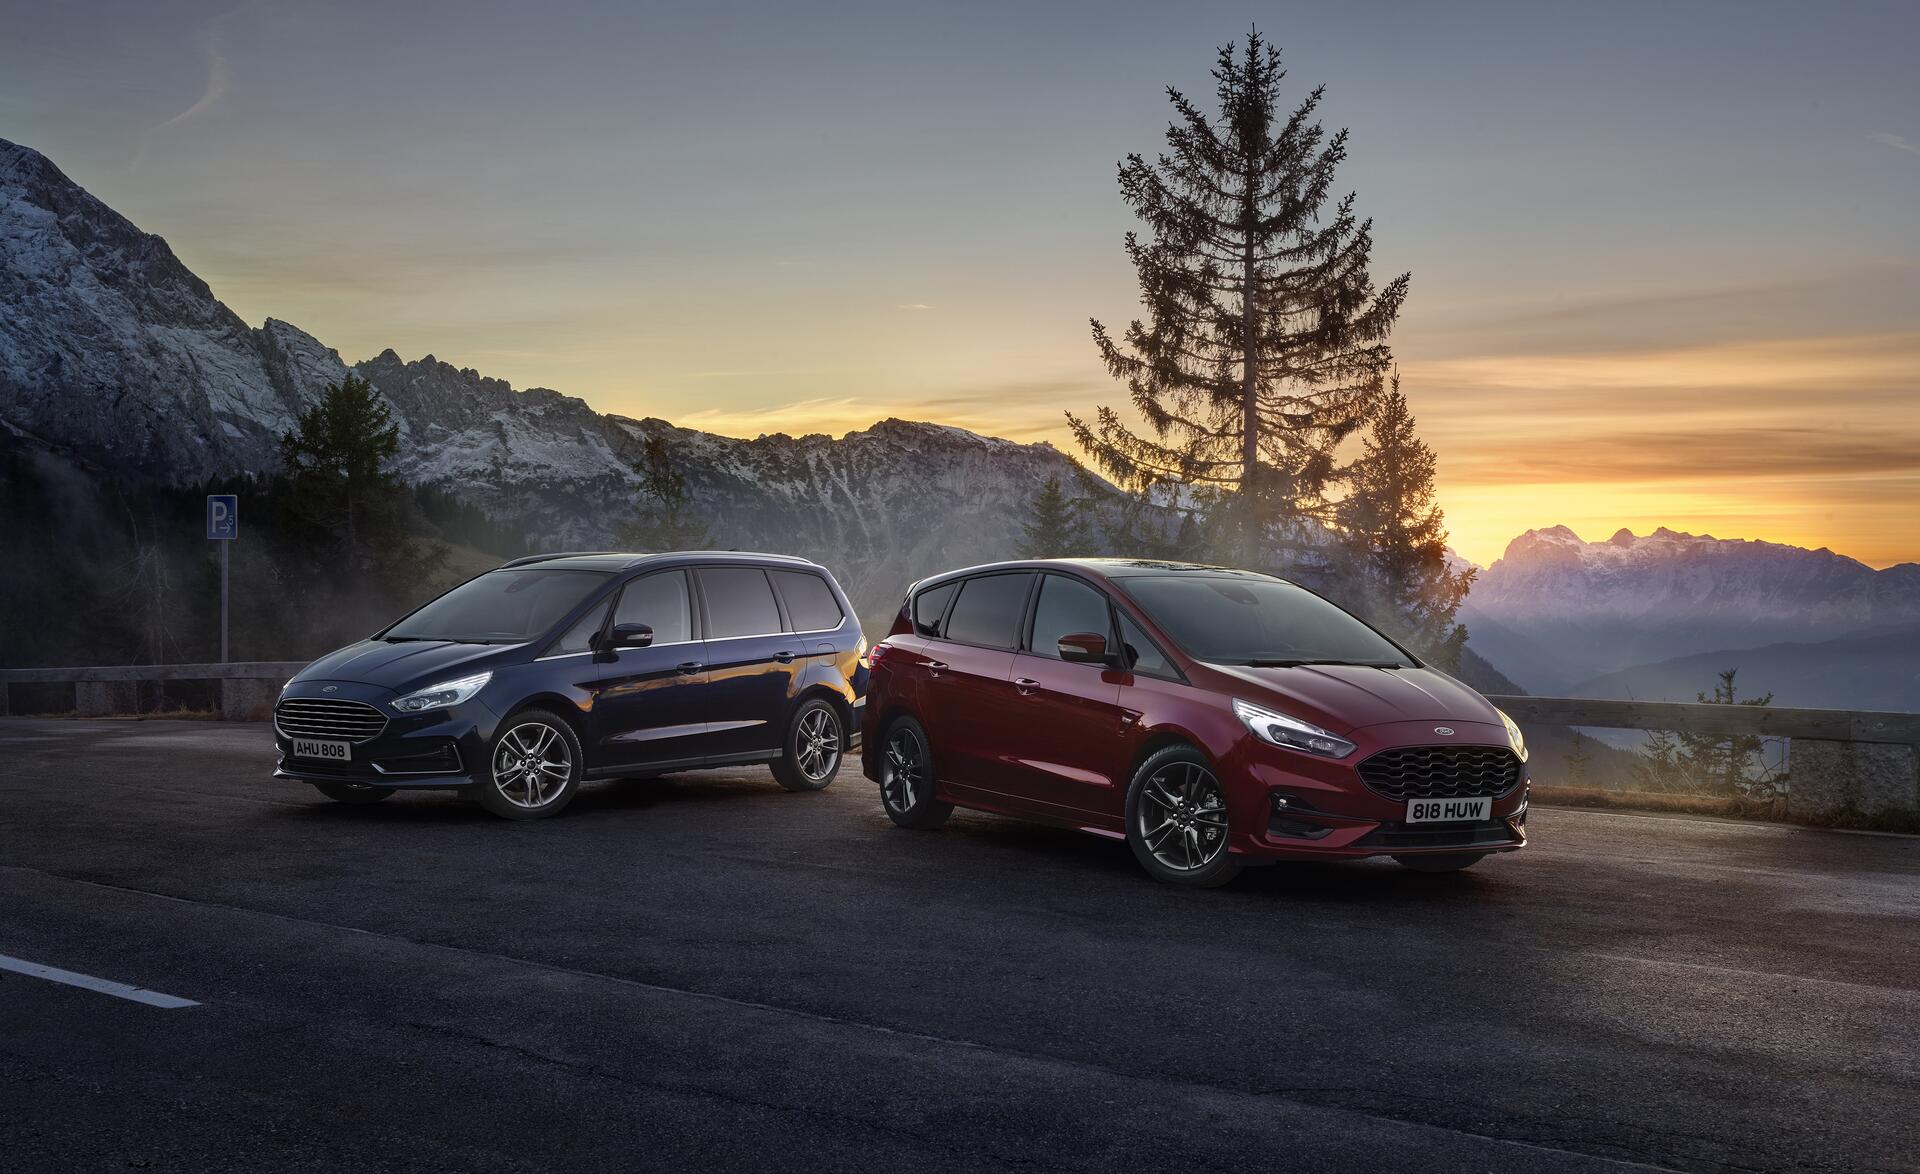 Ford S-Max / Ford Galaxy